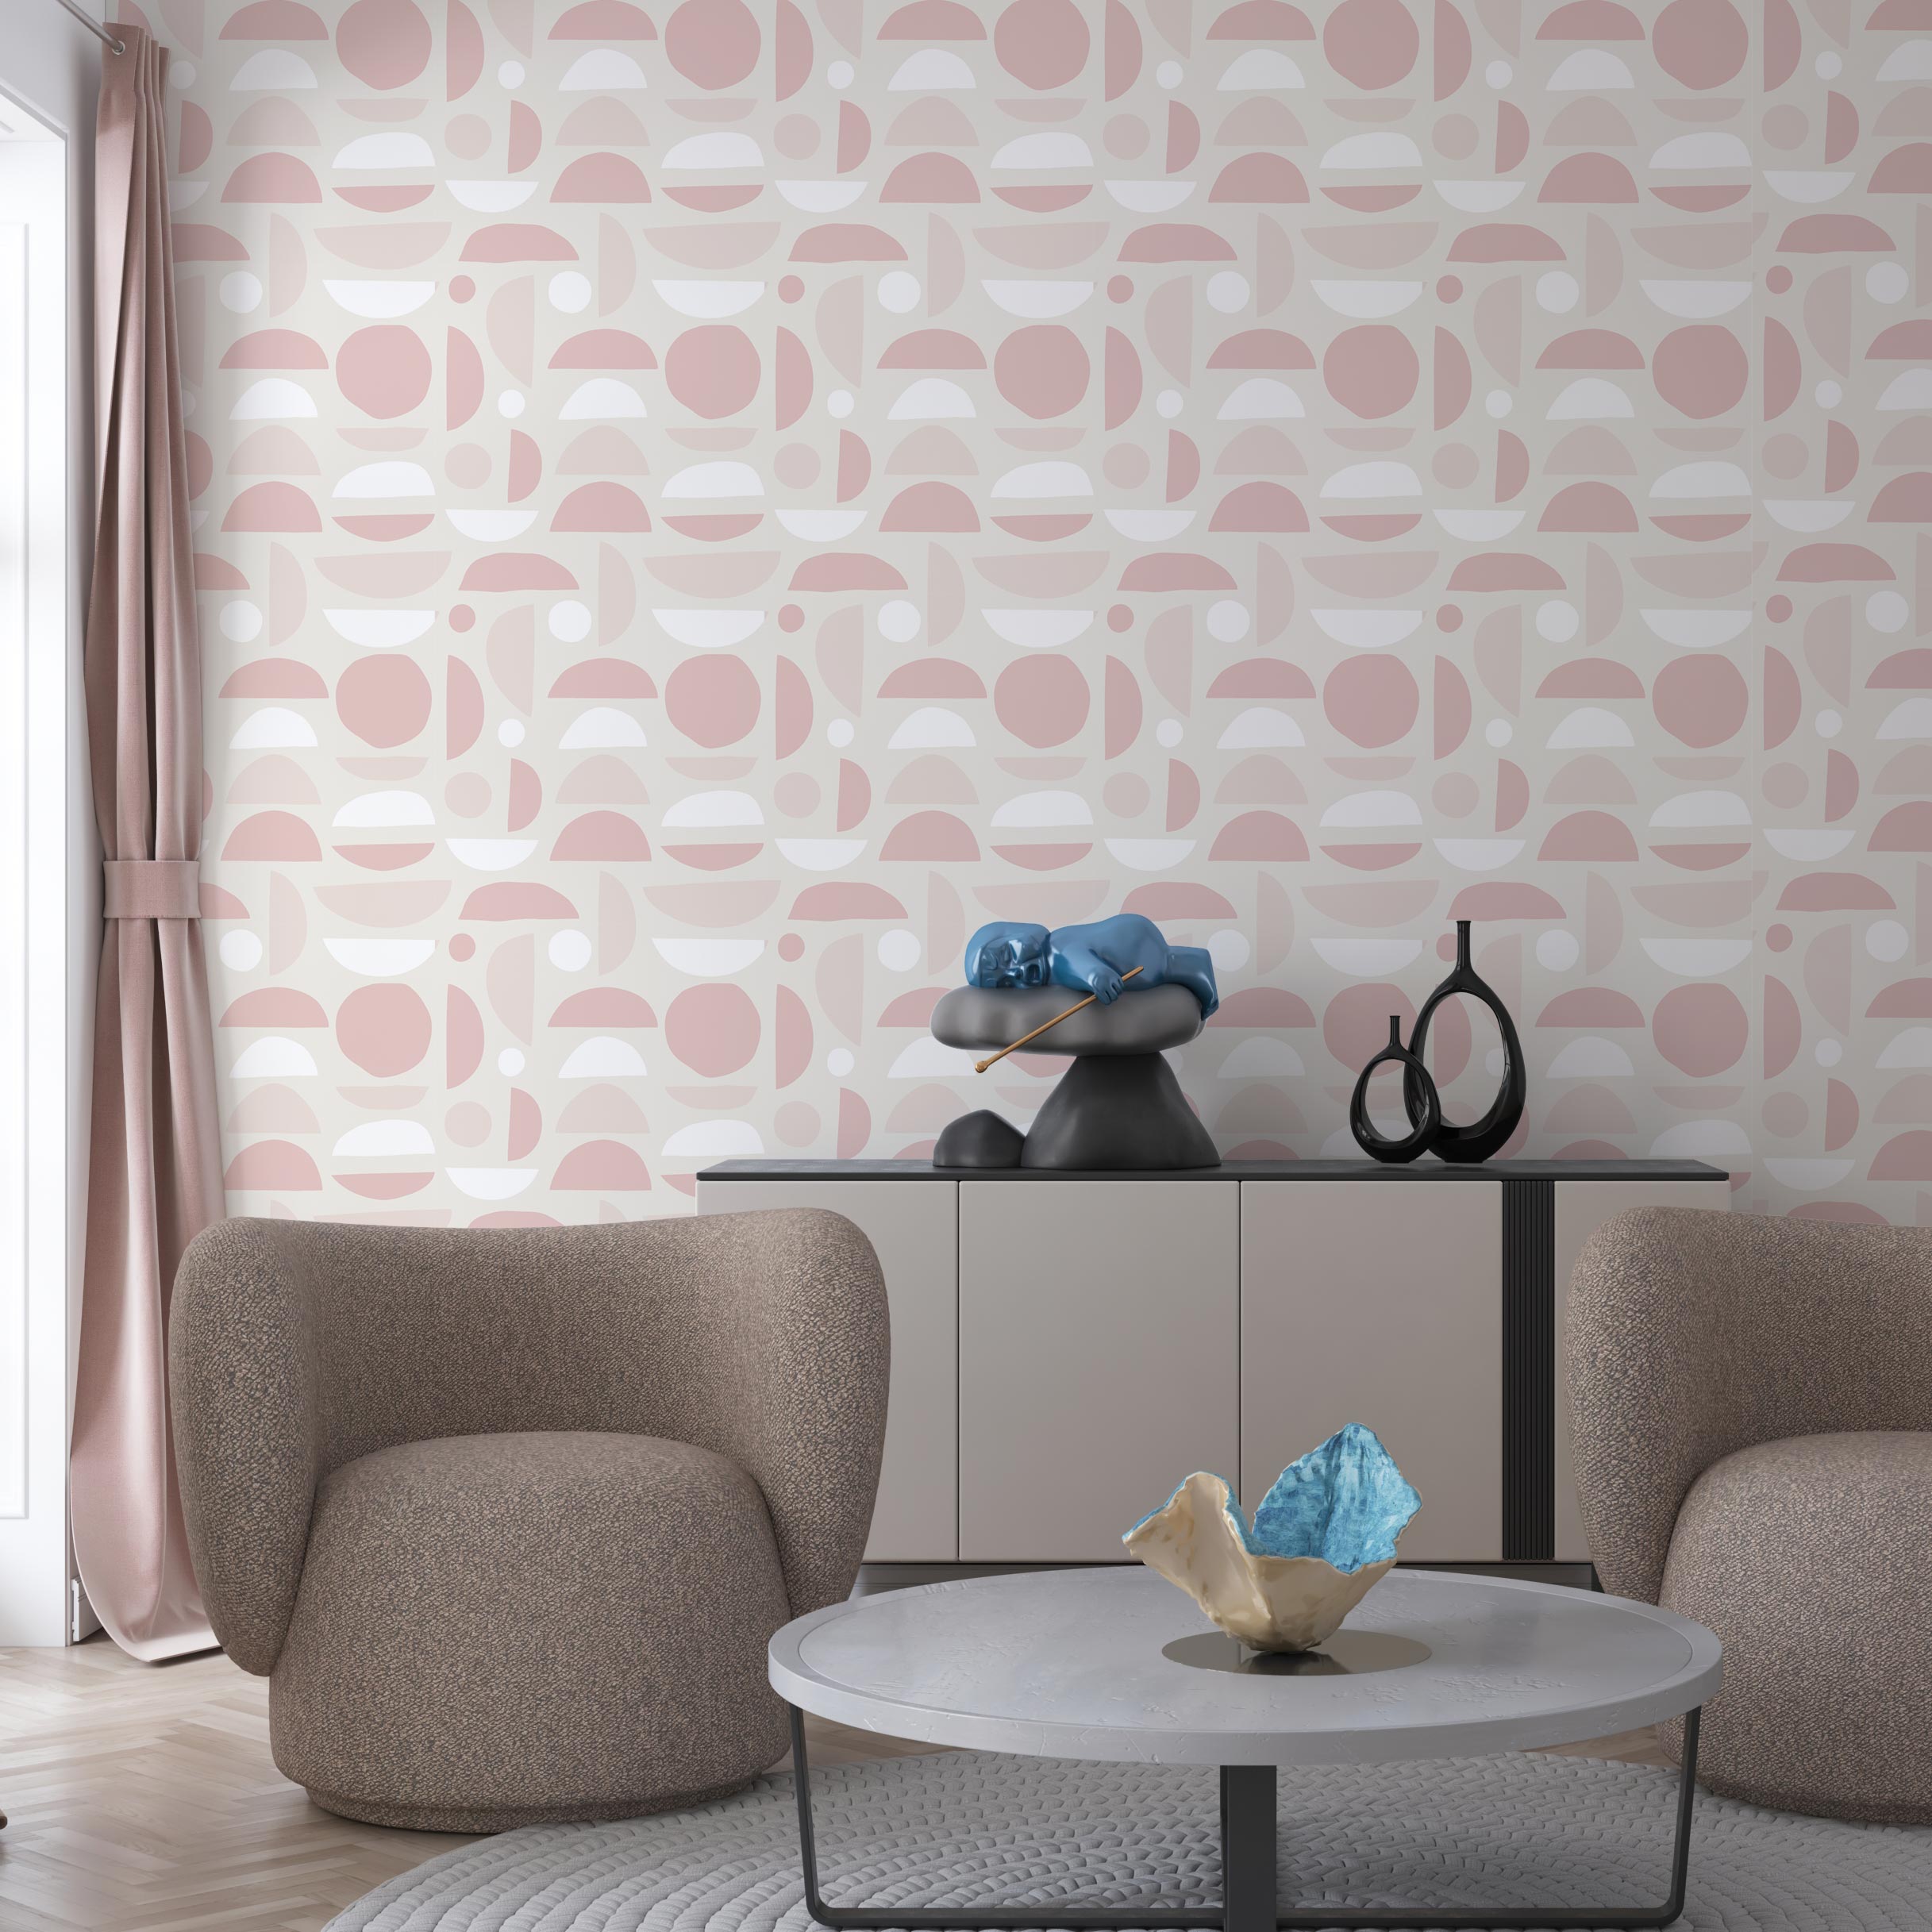 files/The-mid-century-modern-pink-wallpaper-mural-serves-as-a-dramatic-backdrop-for-a-modern-living-room_-adding-a-touch-of-boldness-and-visual-interest.-The-sleek-furniture-and-minimalist_e889f495-d102-48af-8cdf-a0824bedf6cd.jpg